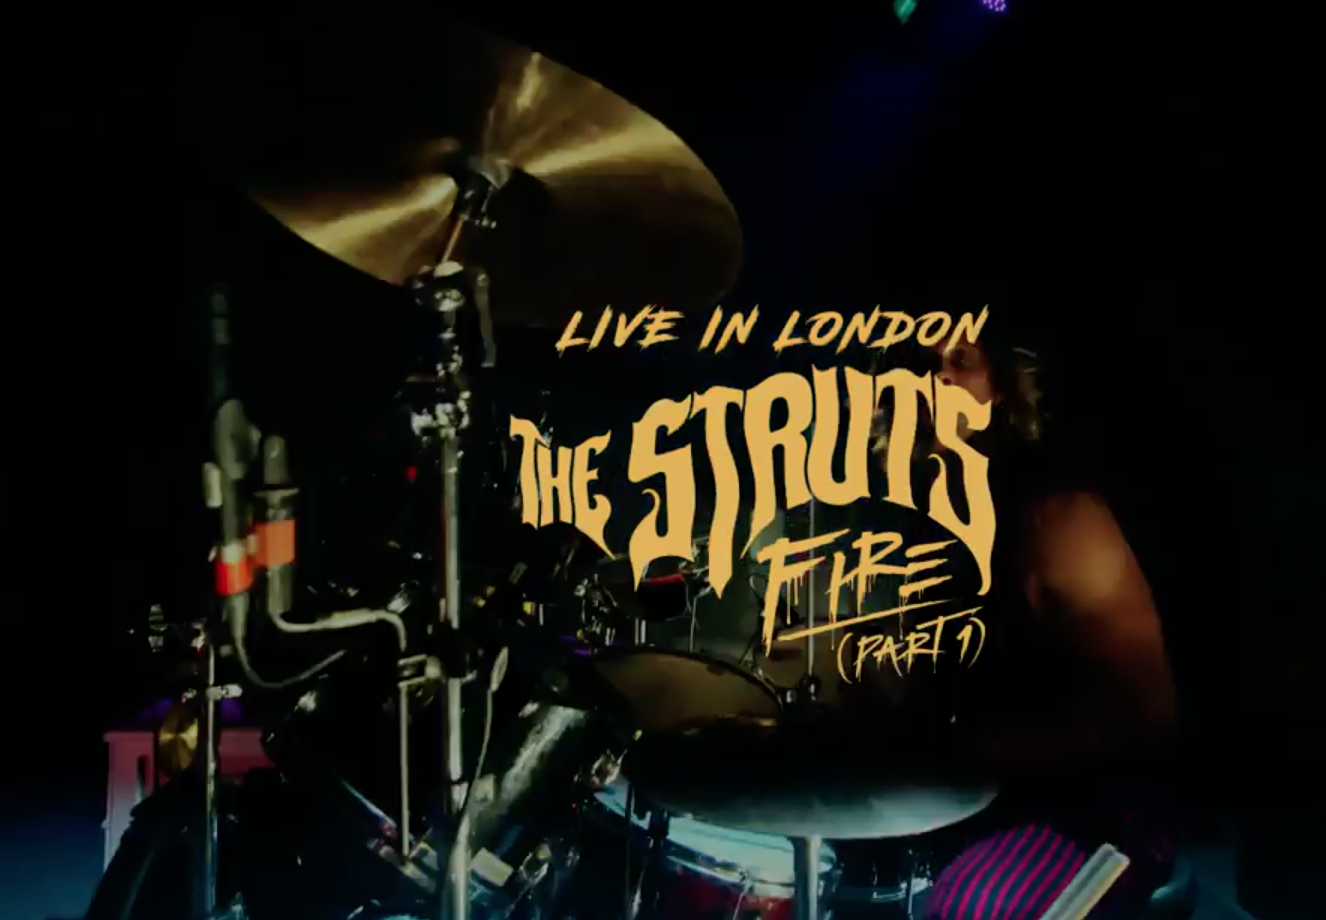 The Struts share explosive live video for 'Fire (Part 1)'